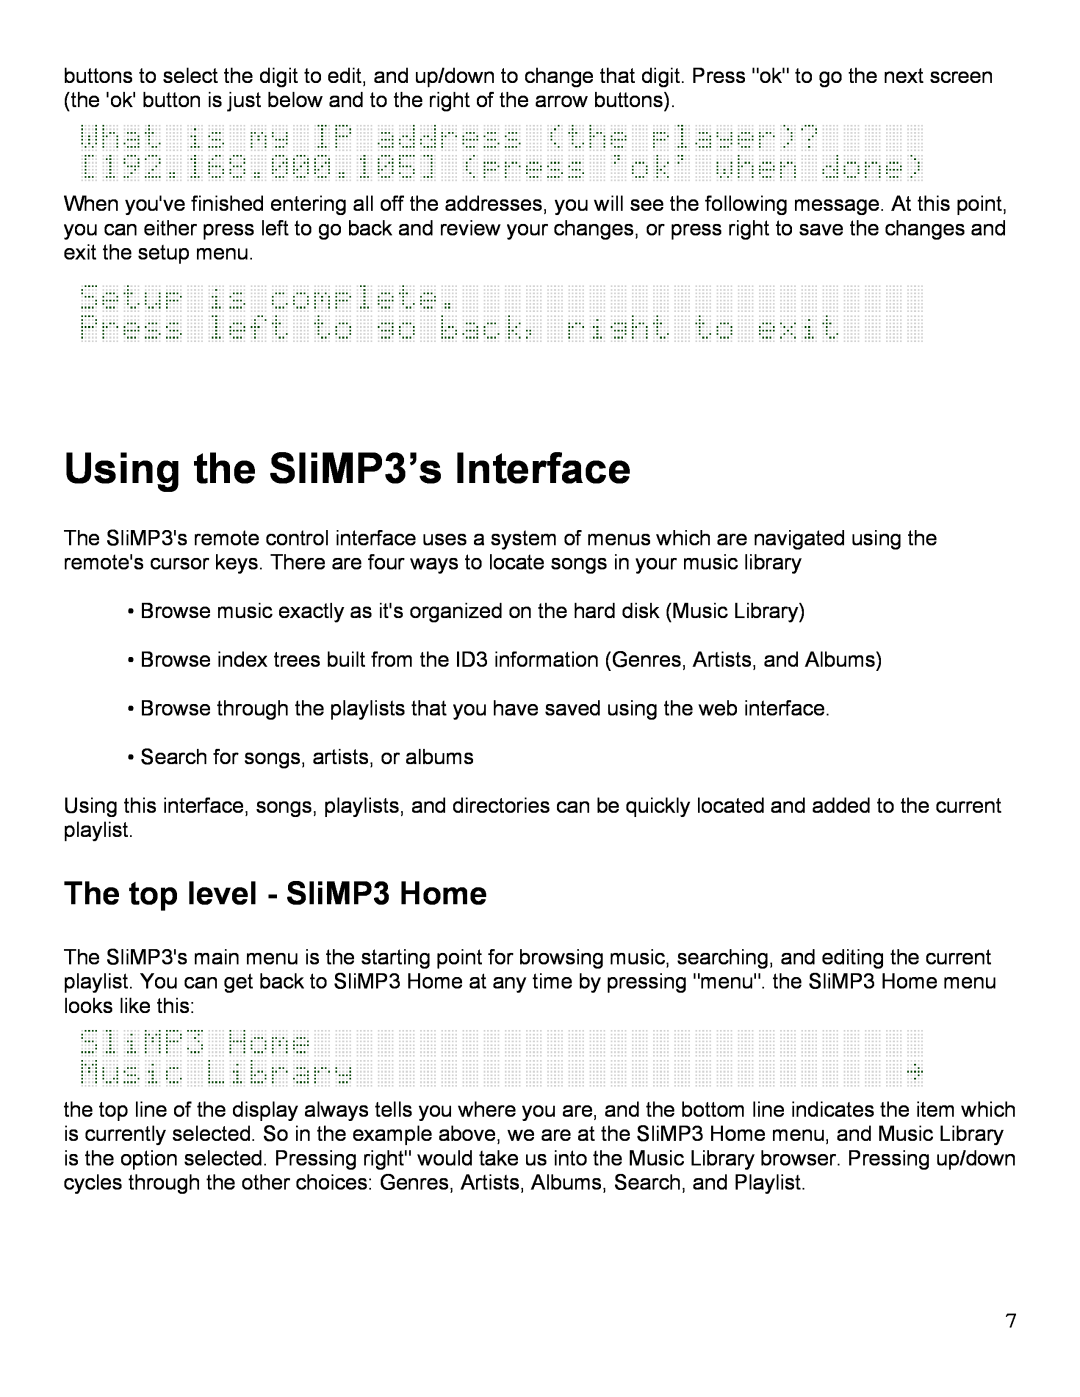 Slim Devices owner manual Using the SliMP3’s Interface, The top level - SliMP3 Home 